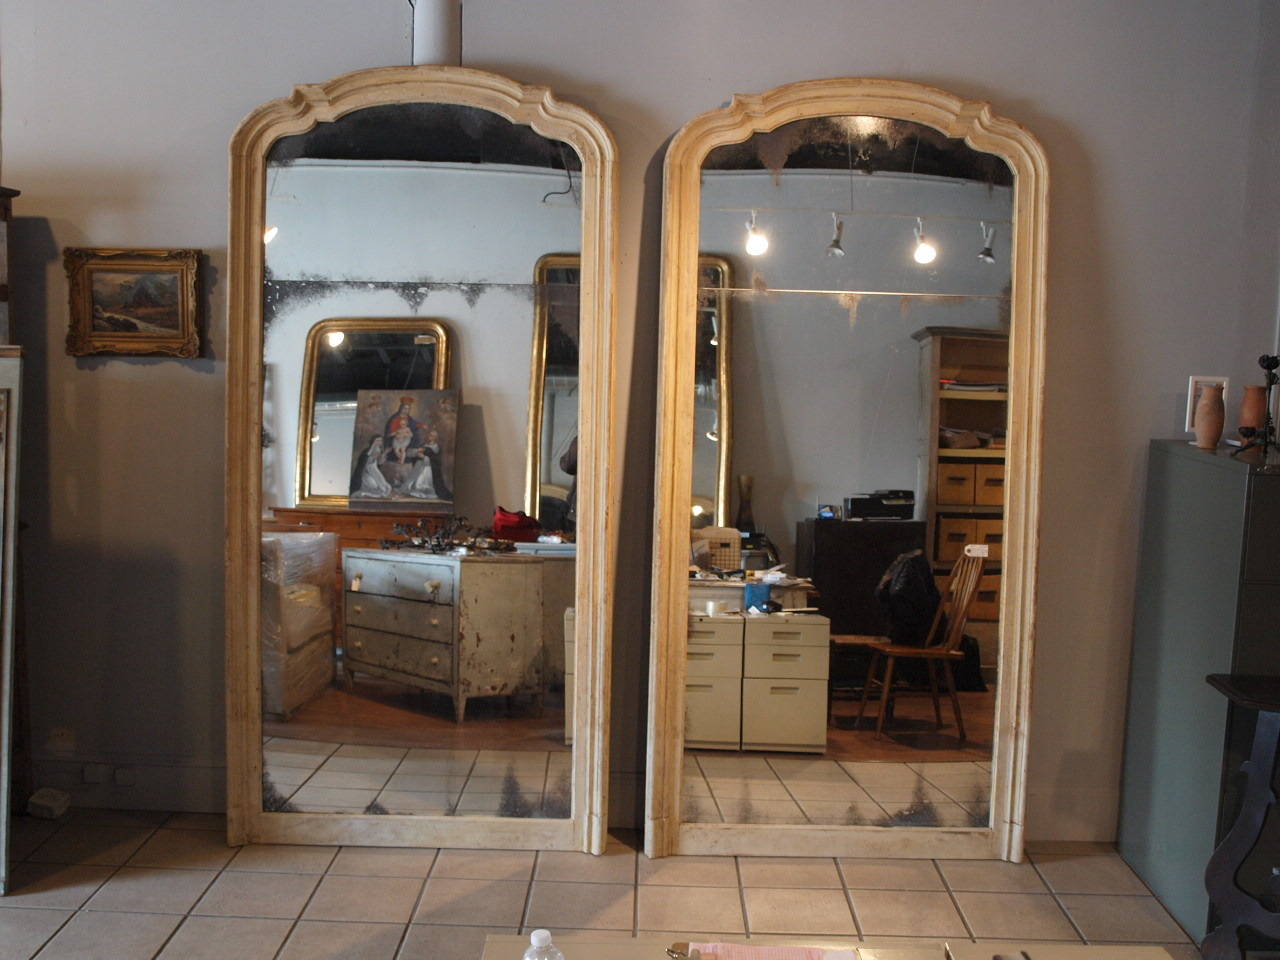 A stunning pair of early 19th century grand scale architectural door frames as trumeau style mirrors. These fantastic mirrors retain their original paint. The paint is in a very soft shade of pale, pale yellow with vanilla undertones. The price for